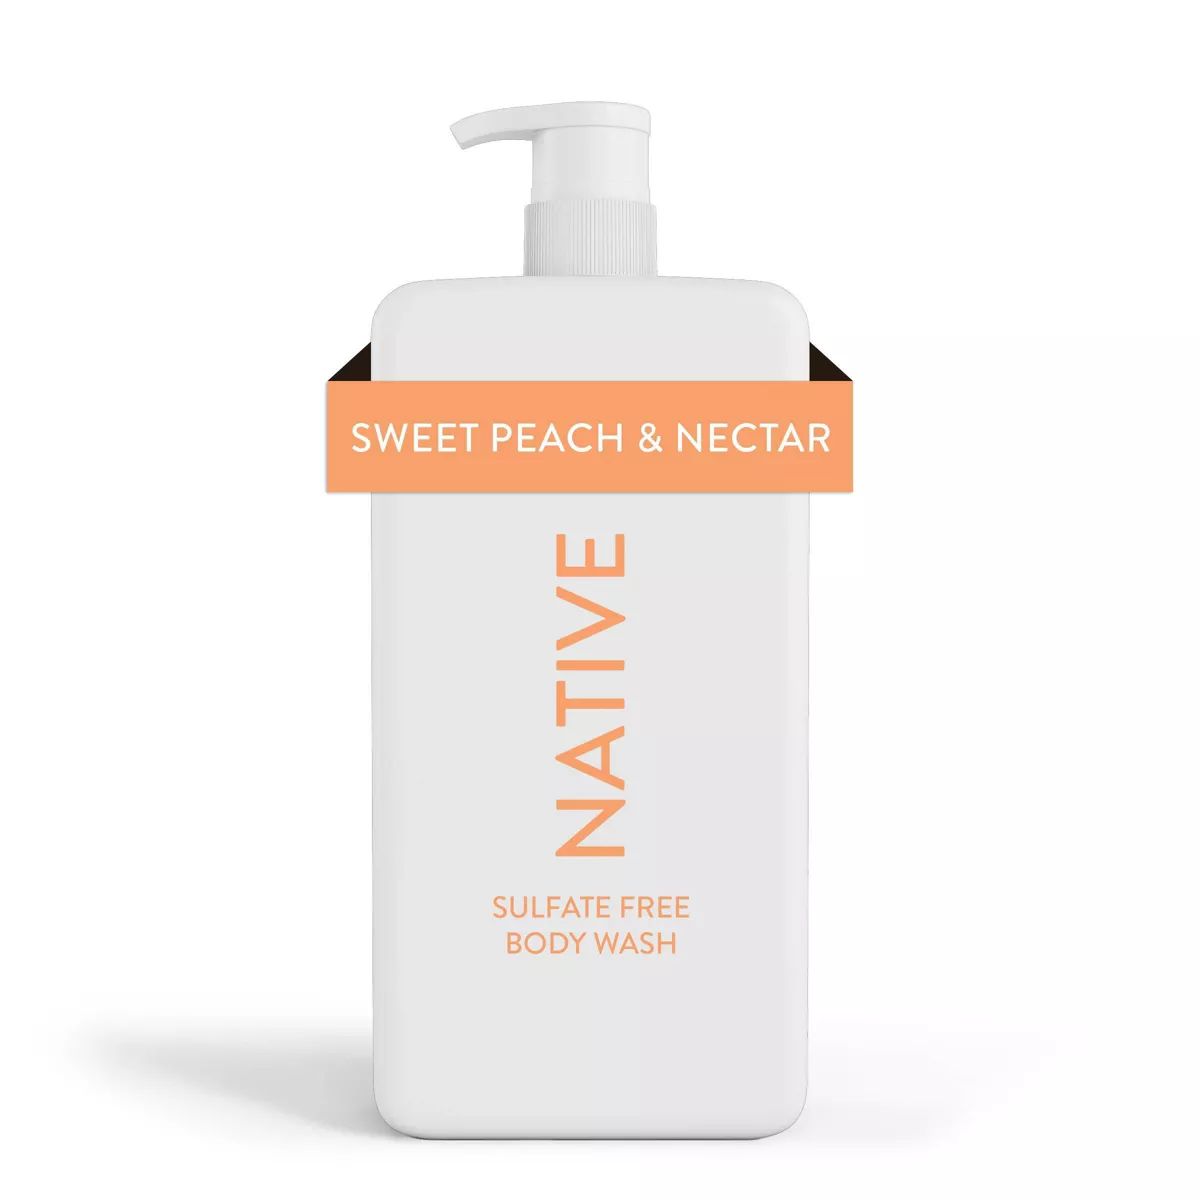 Native Body Wash with Pump - Sweet Peach & Nectar - Sulfate Free - 36 fl oz | Target